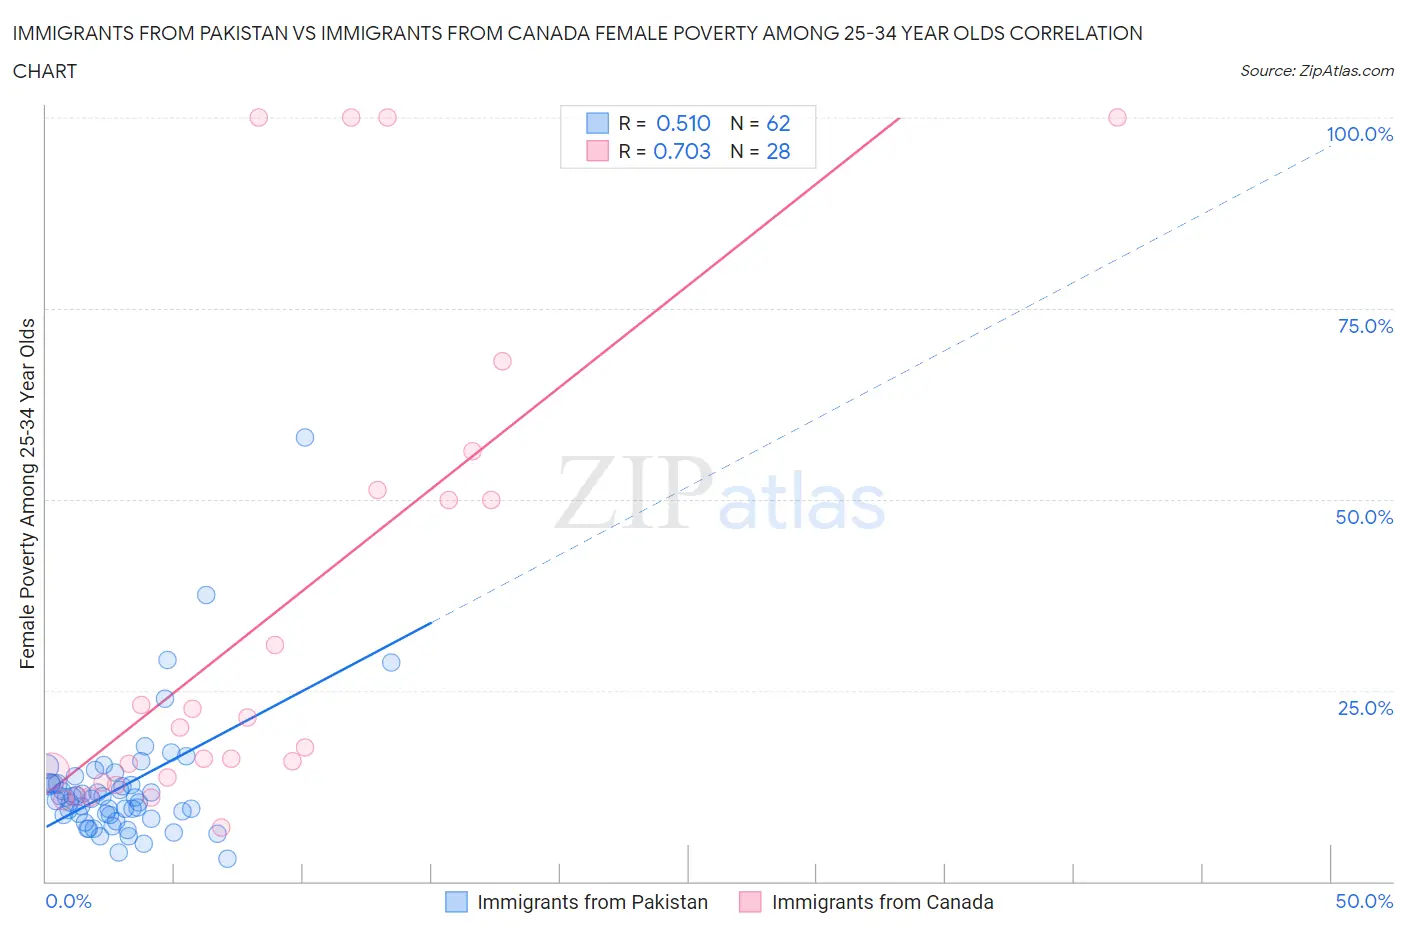 Immigrants from Pakistan vs Immigrants from Canada Female Poverty Among 25-34 Year Olds